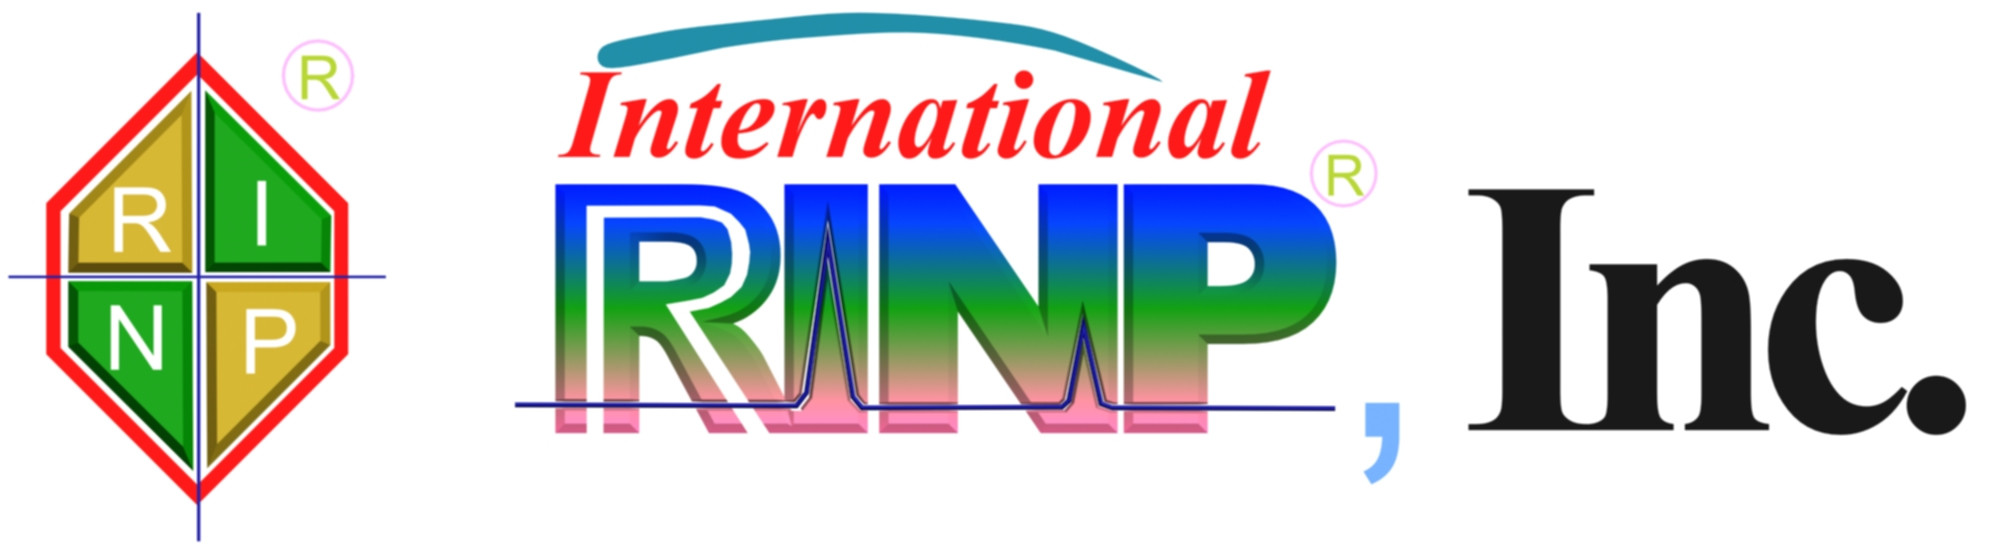 International RINP, Inc. - International RINP is a FDA registered testing laboratory. RINP provides technical support and testi